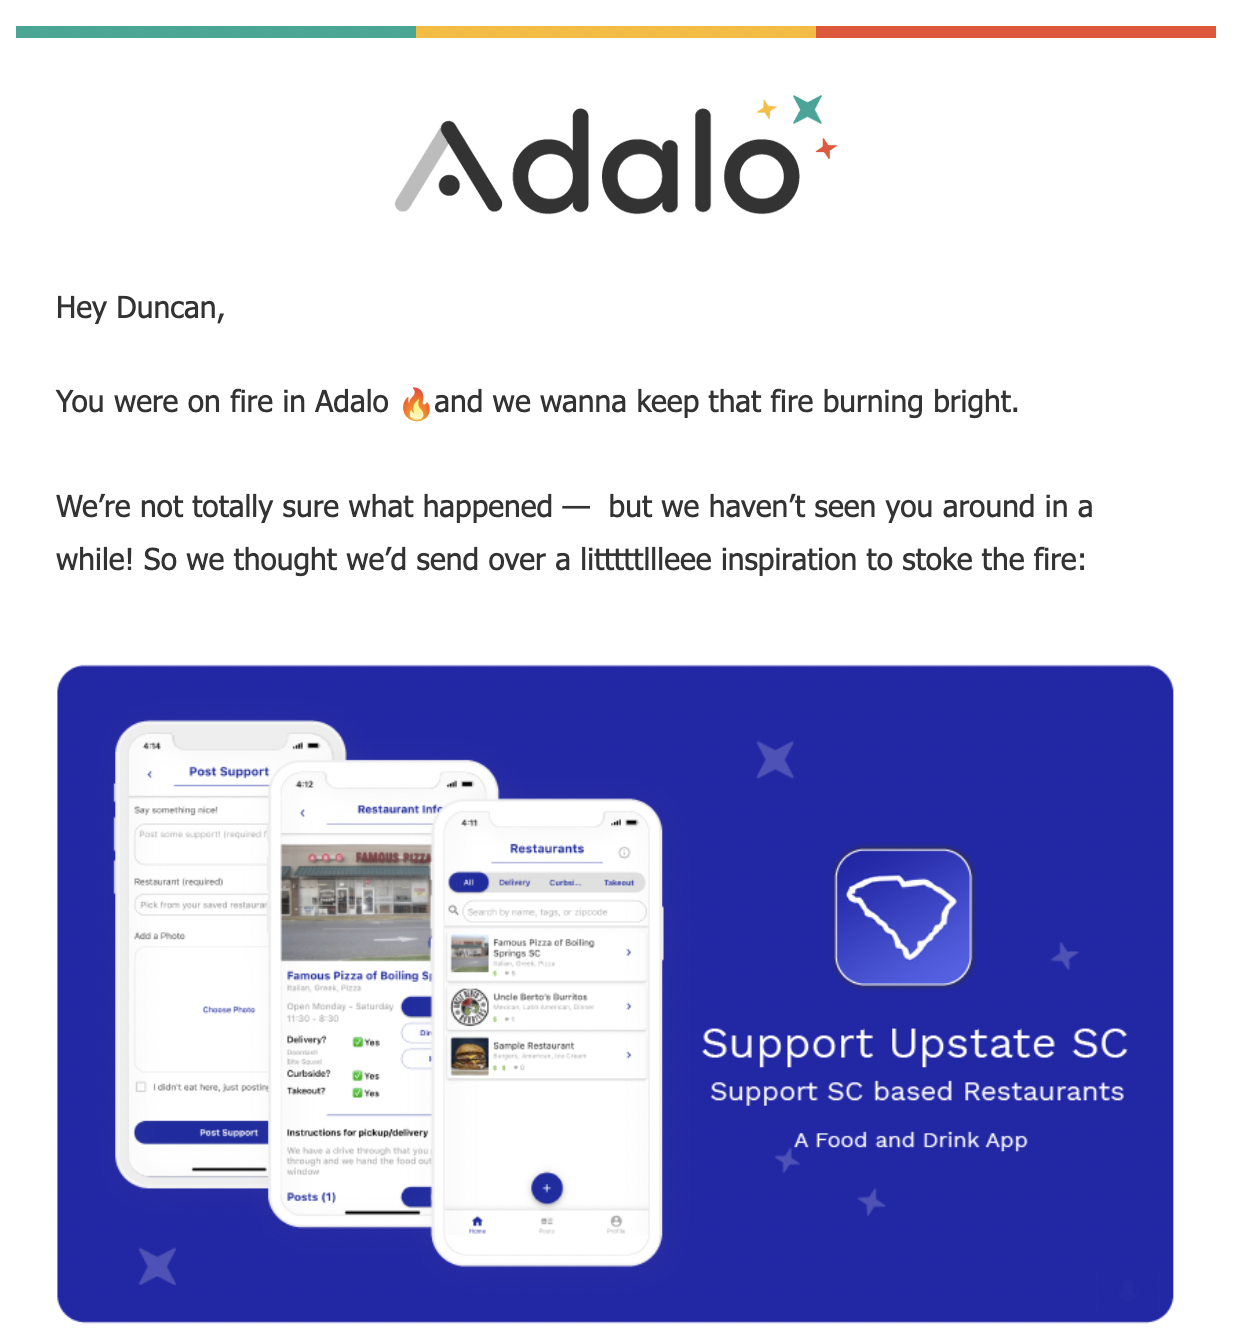 Adalo re-engagement email